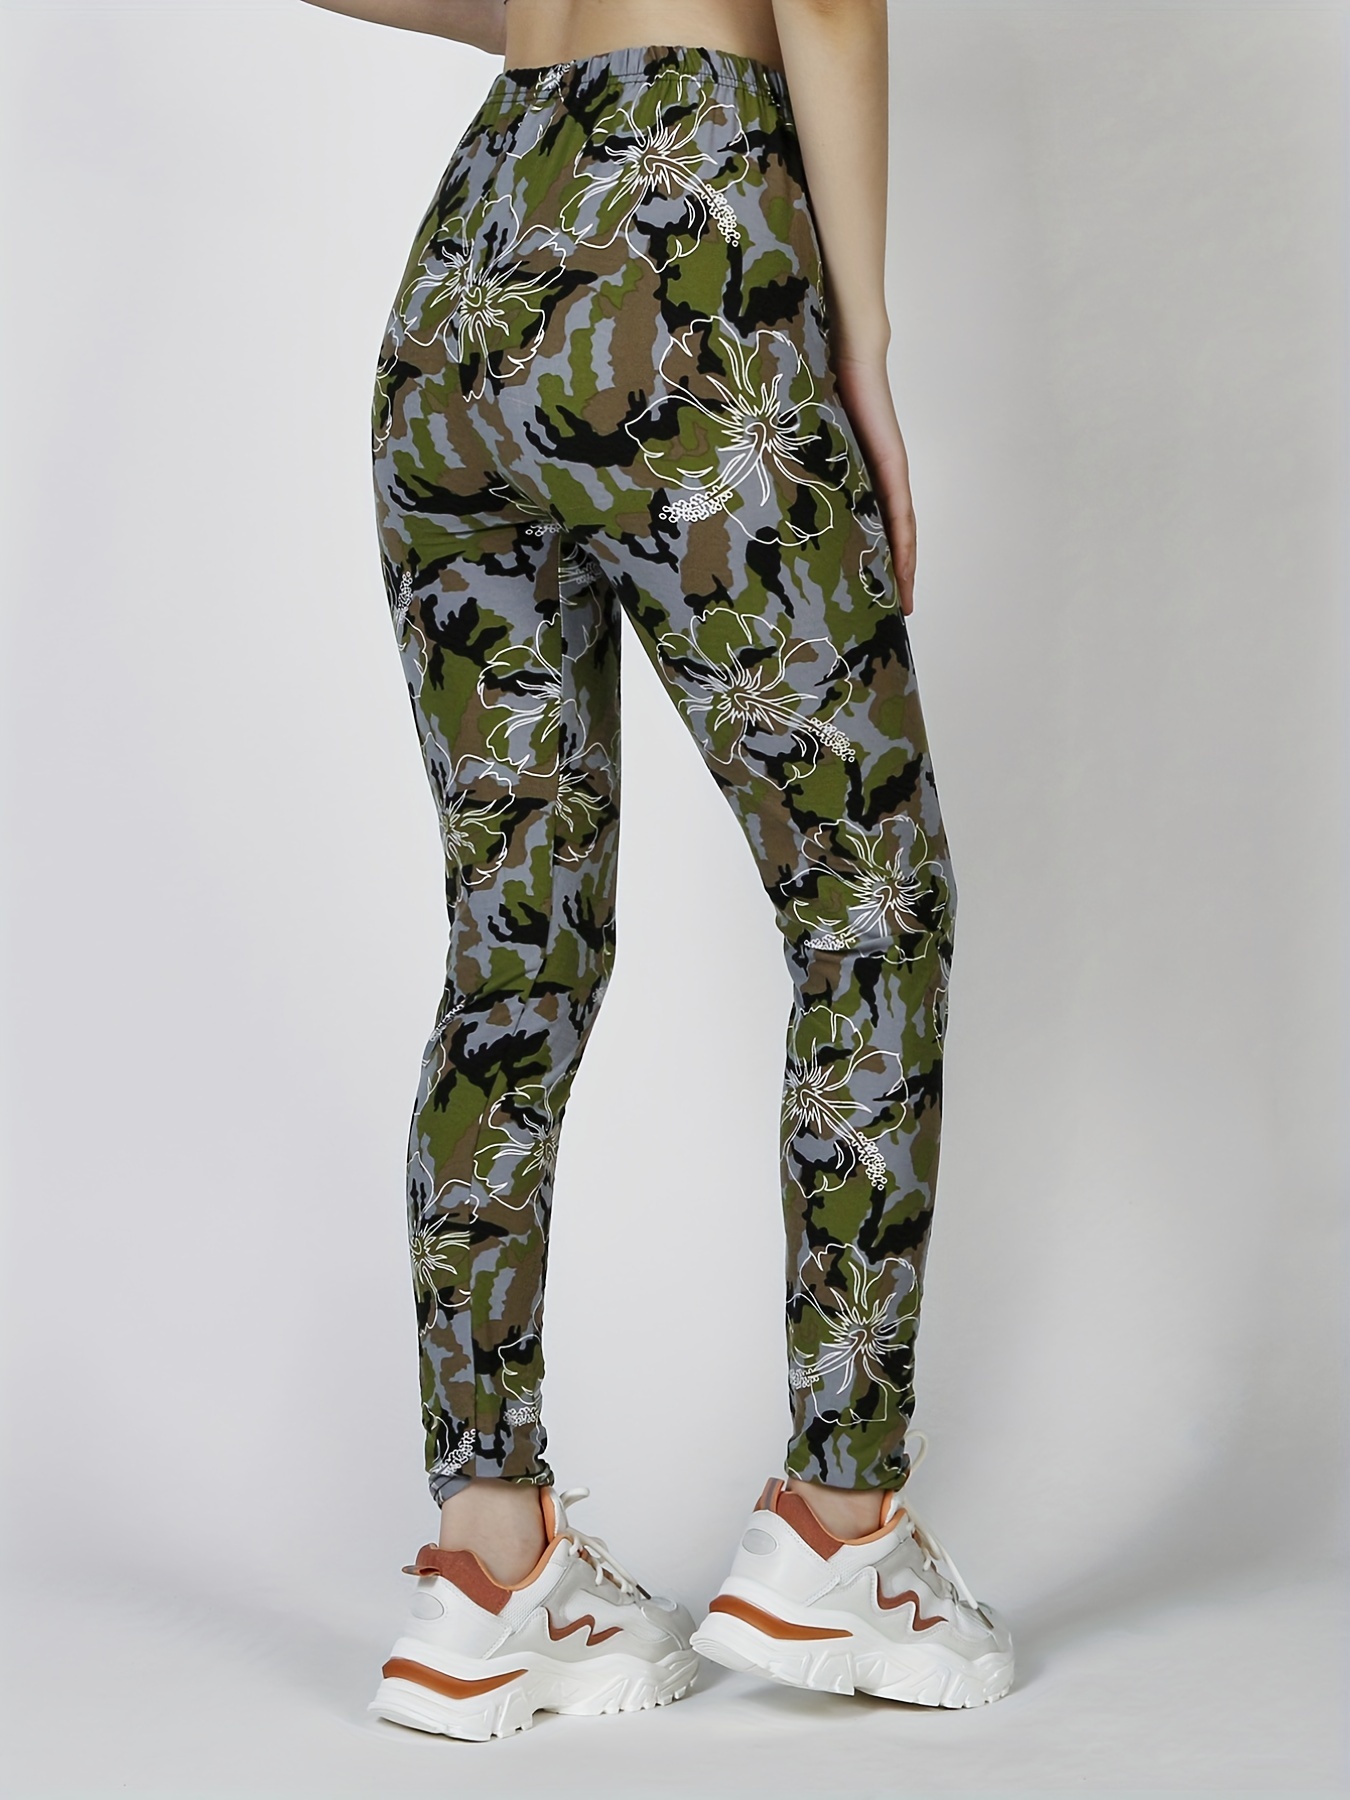 Nike NSW Camo Leggings Camouflage Activewear High Rise Green Size